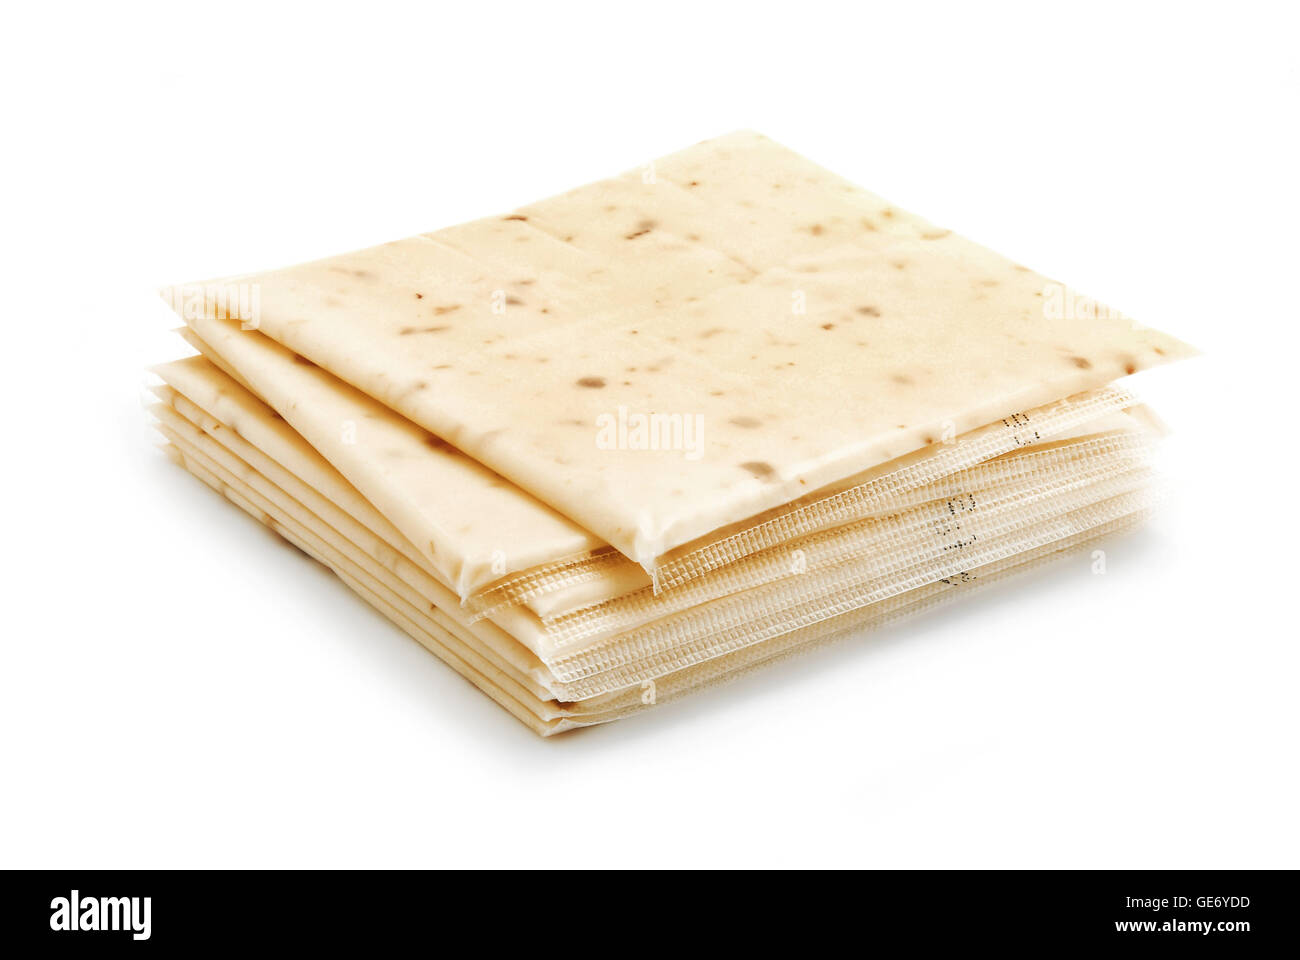 packed cheese slices Stock Photo